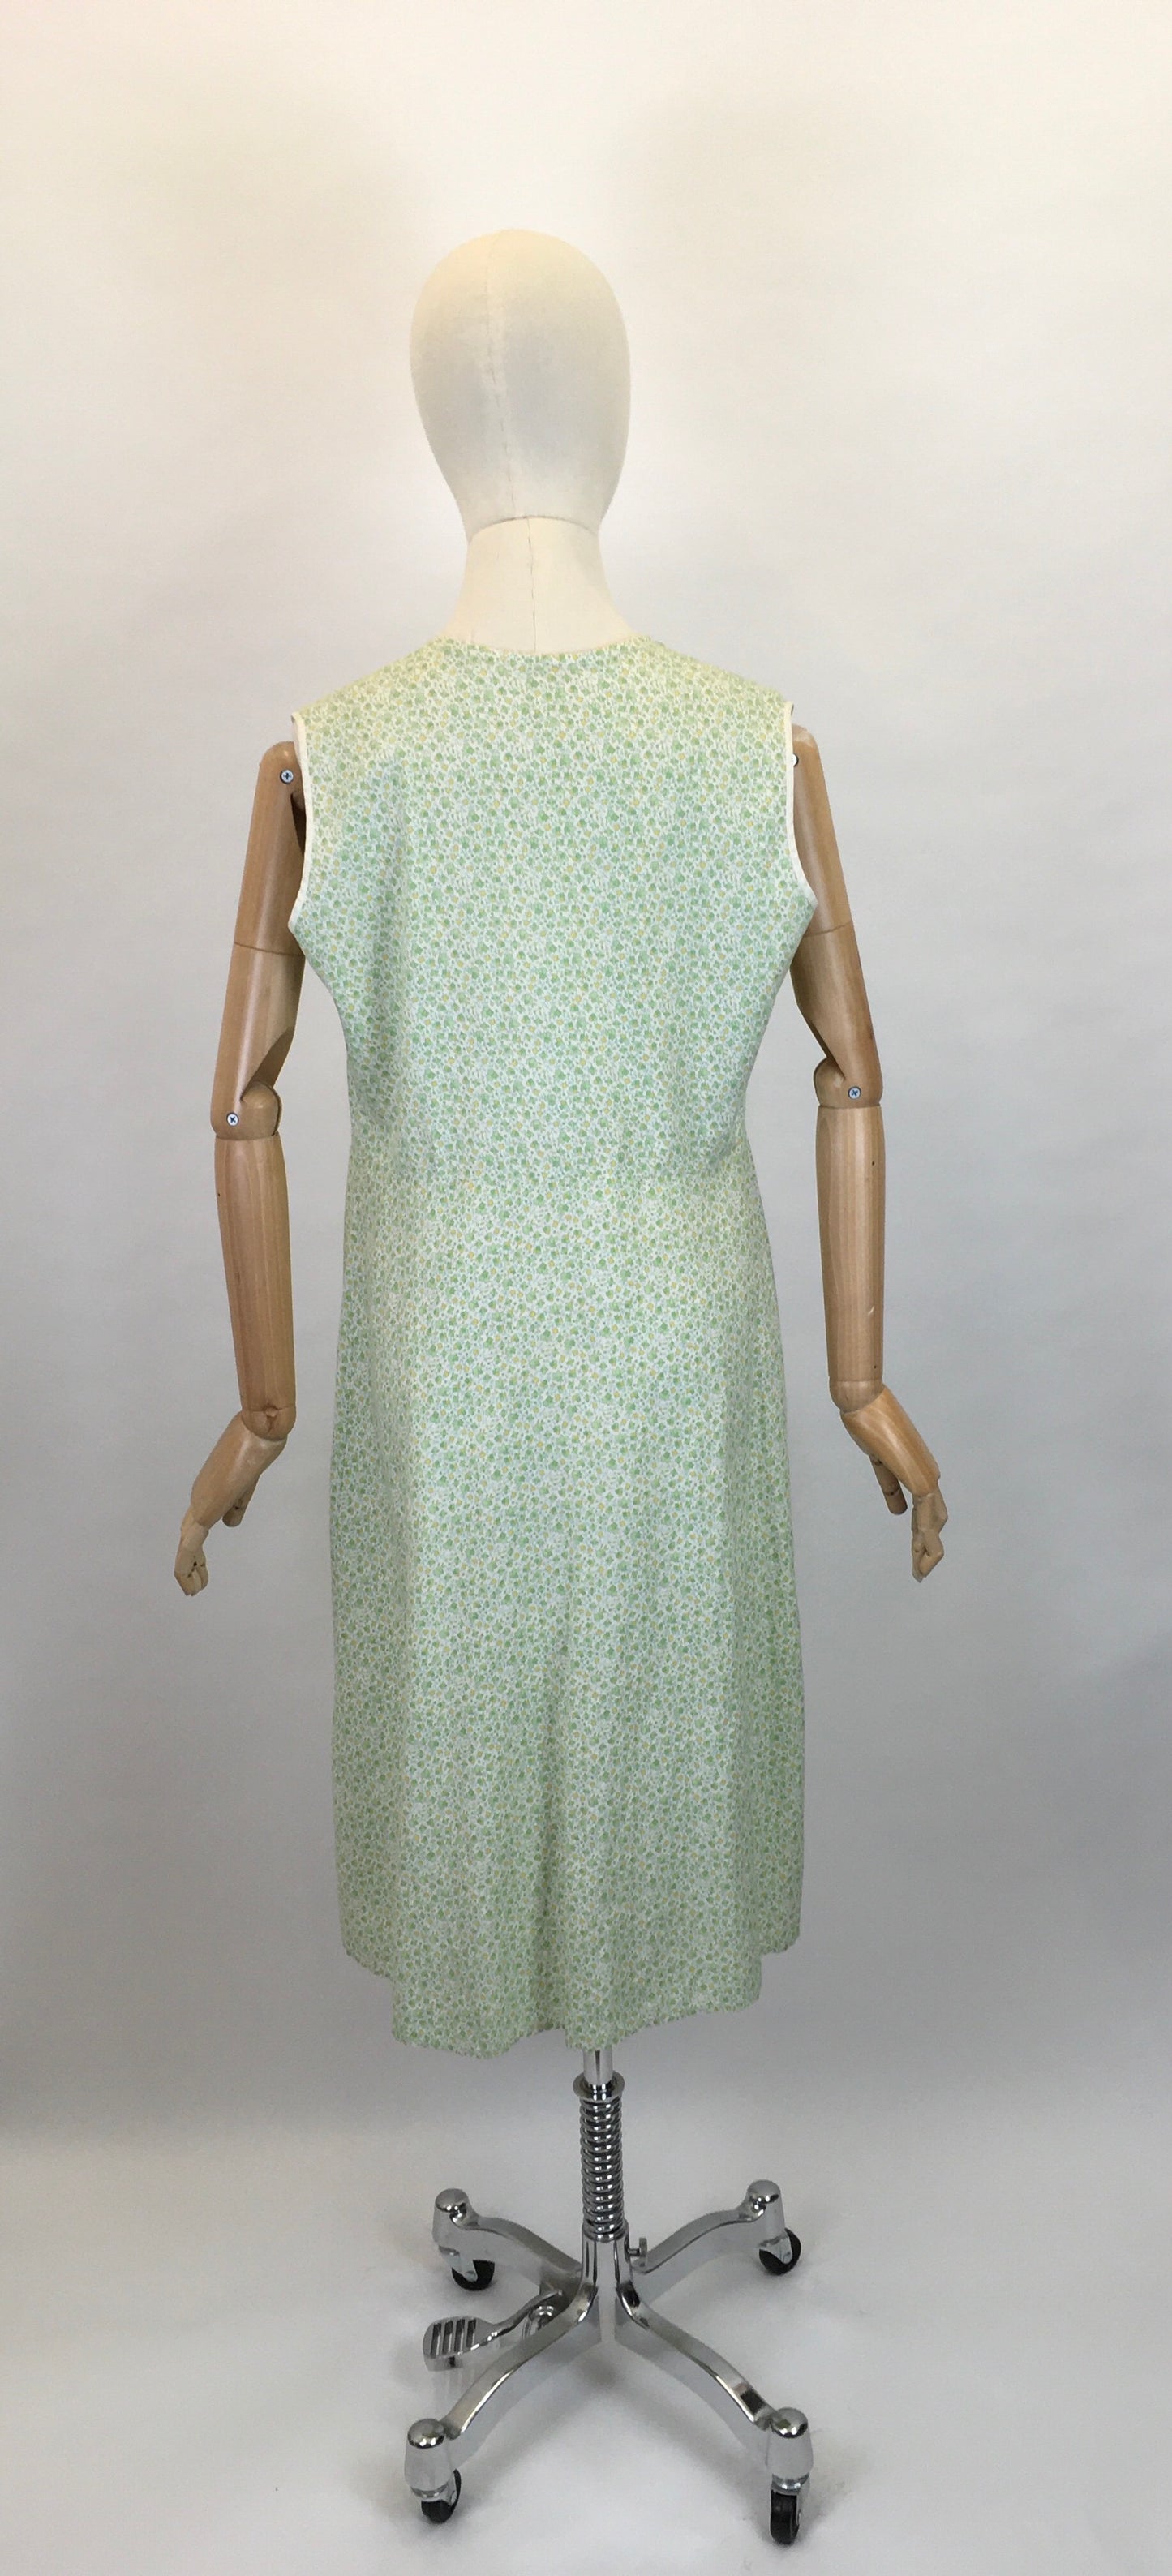 Original 1930s Cotton Day Dress - In a Lovely Colour Pallet of Soft greens, Buttercup Yellows and White